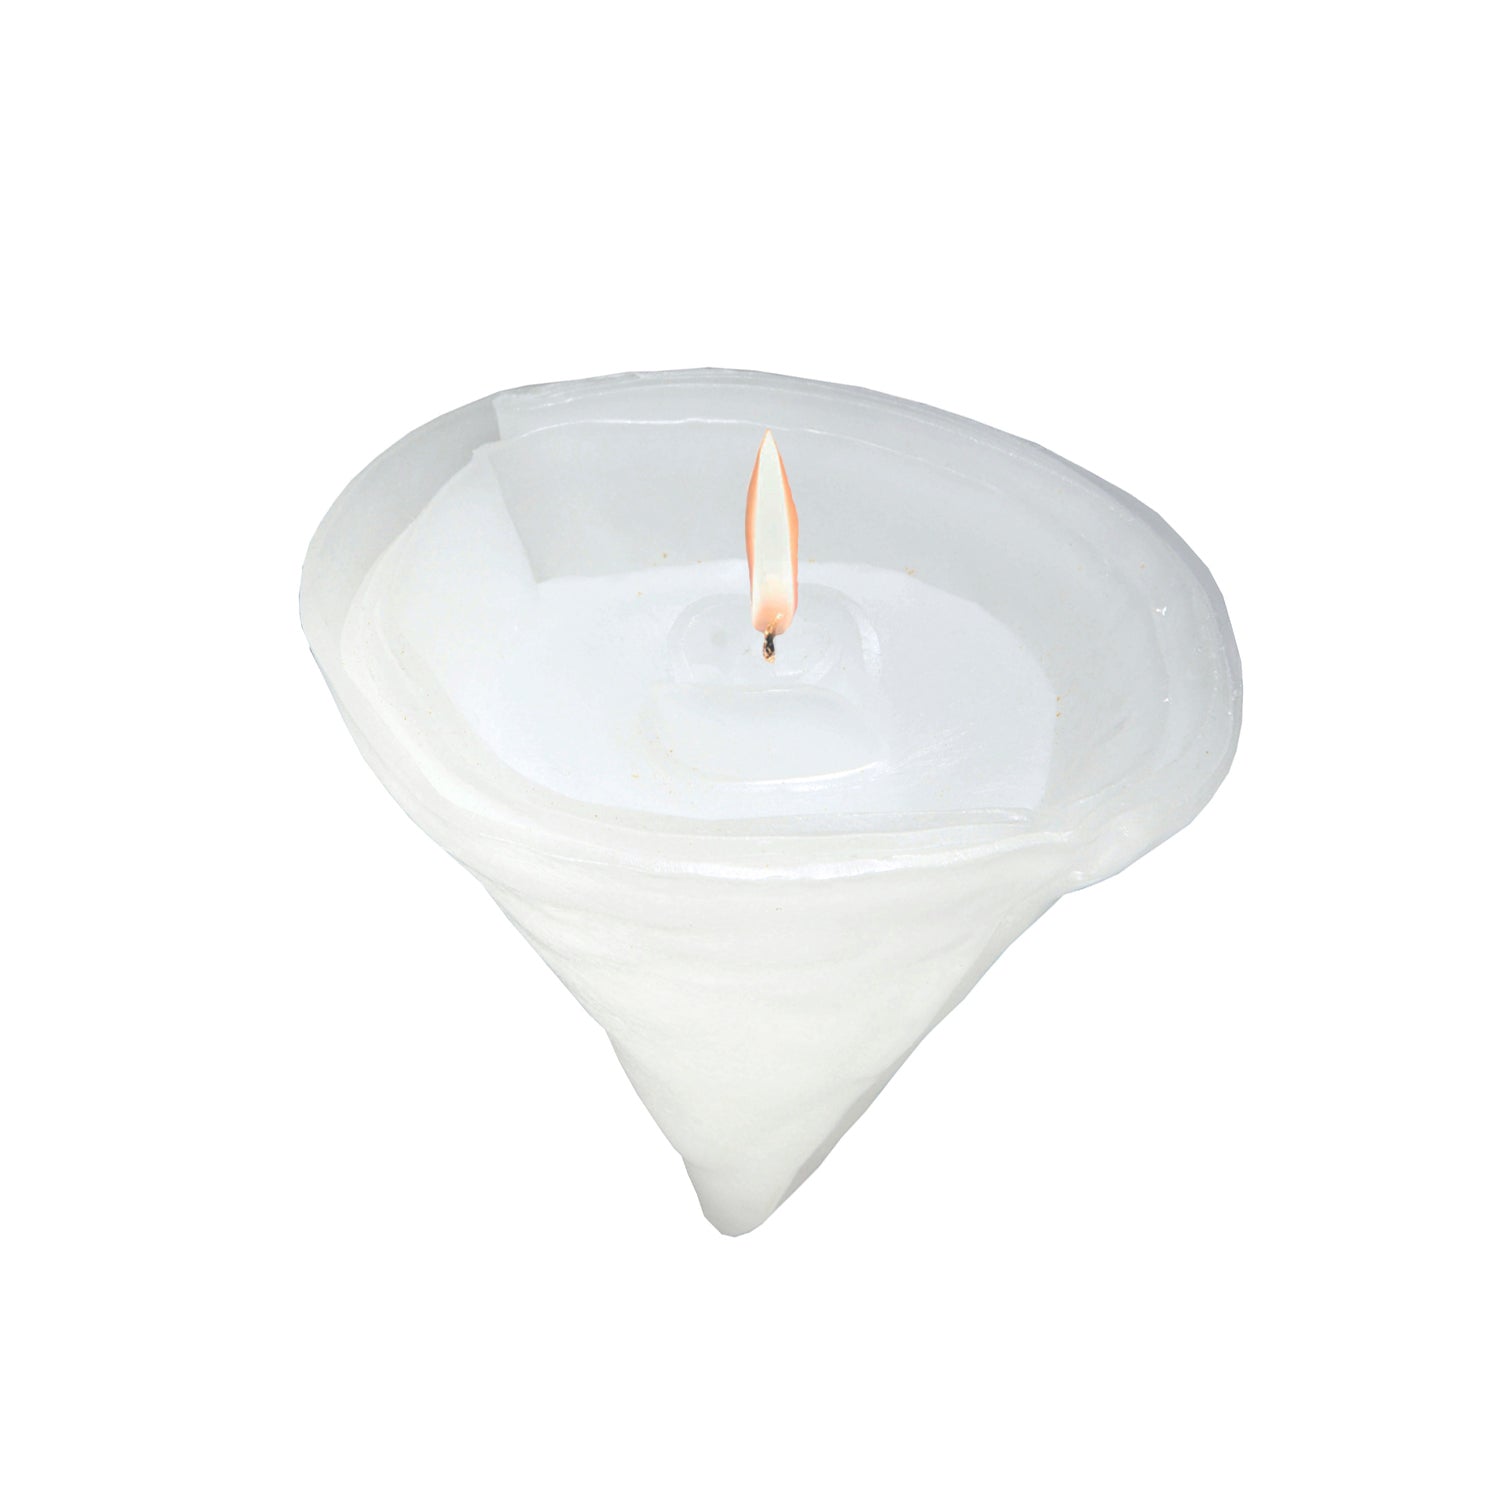 CONICAL FLOATING CANDLE FLORES XL